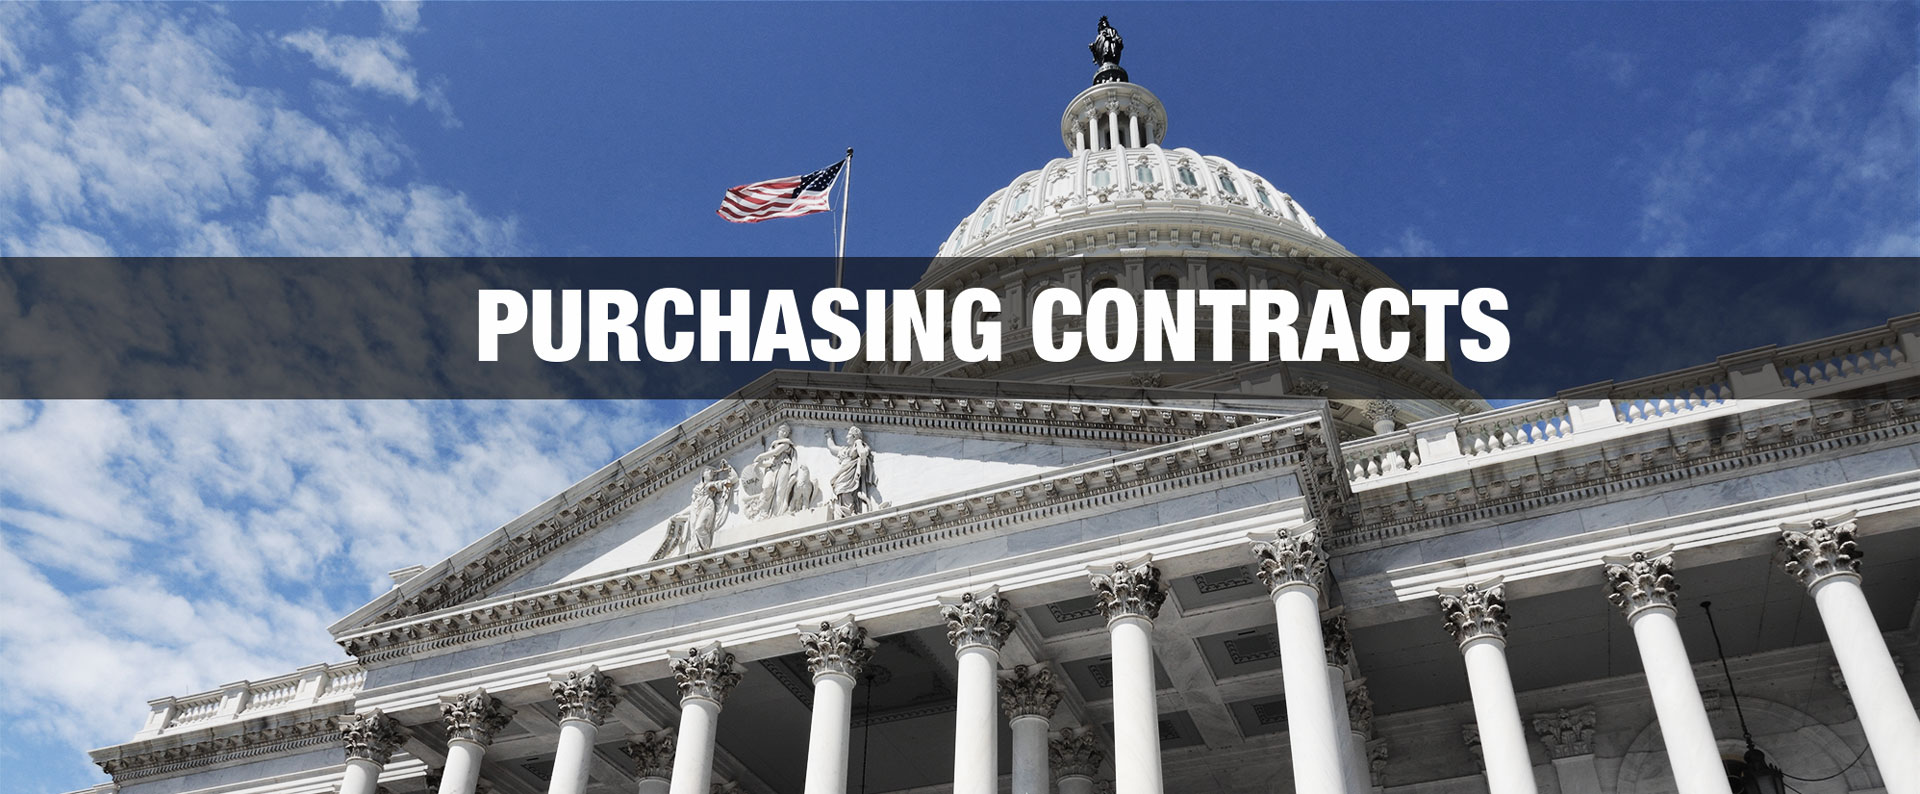 Purchasing Contracts